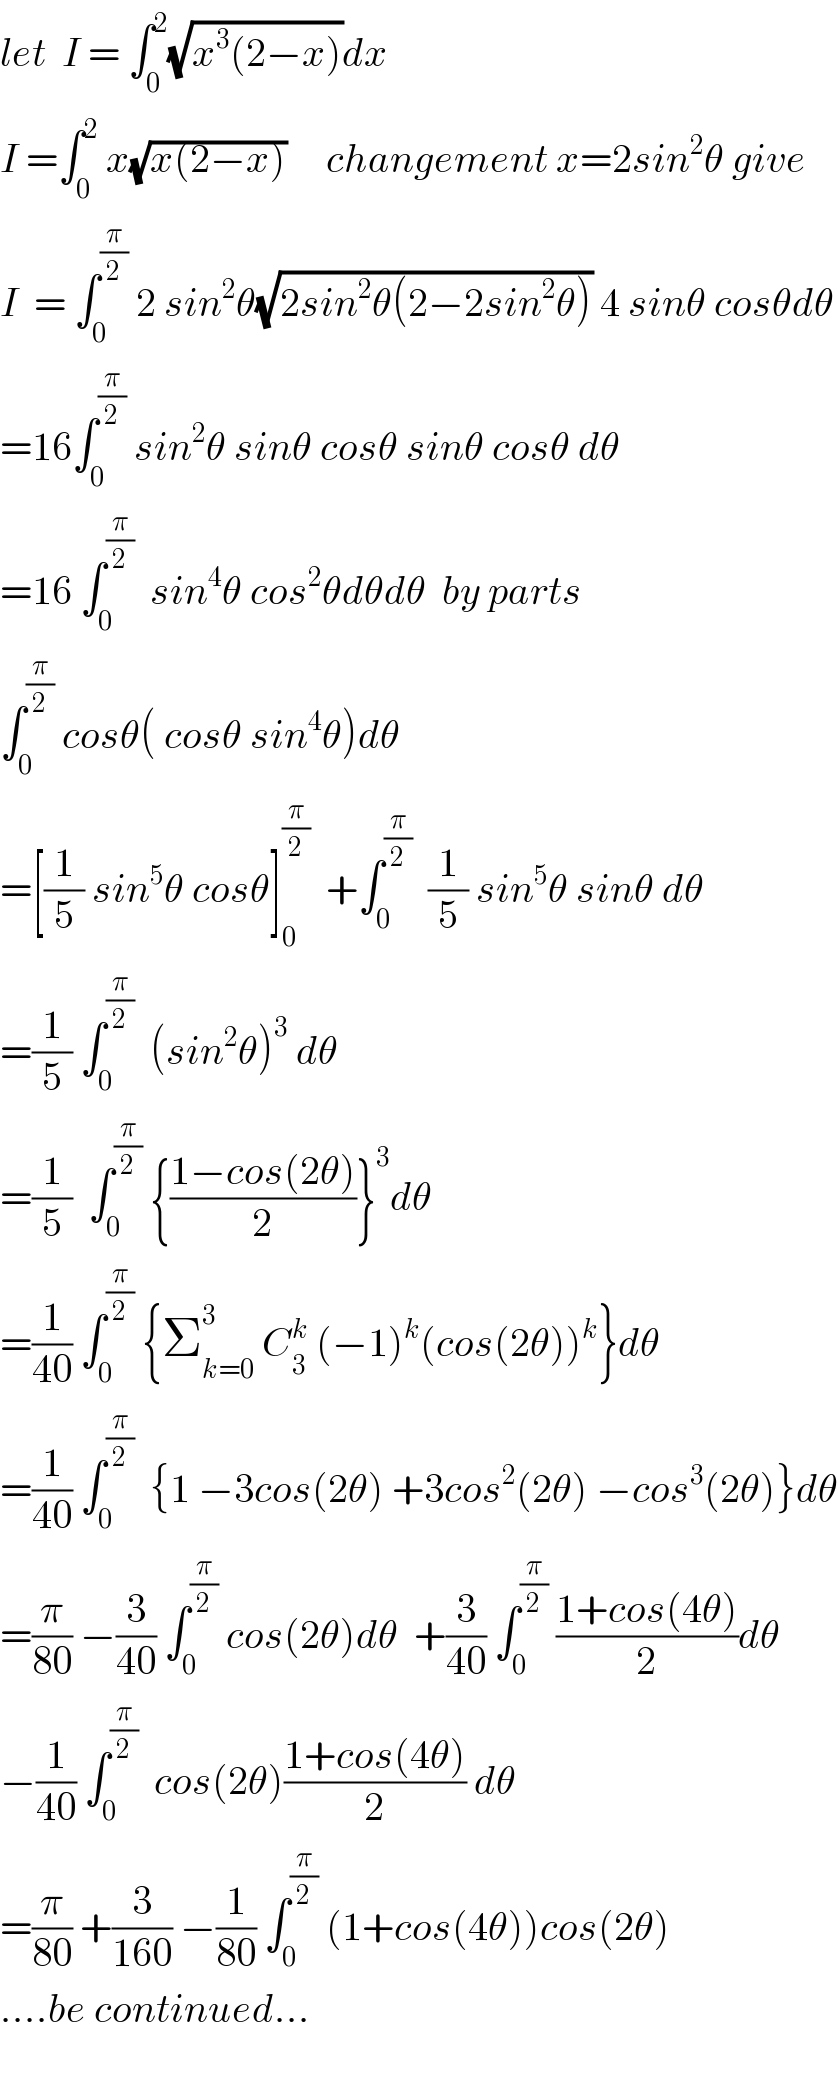 let  I = ∫_0 ^2 (√(x^3 (2−x)))dx  I =∫_0 ^2  x(√(x(2−x)))     changement x=2sin^2 θ give  I  = ∫_0 ^(π/2)  2 sin^2 θ(√(2sin^2 θ(2−2sin^2 θ))) 4 sinθ cosθdθ  =16∫_0 ^(π/2)  sin^2 θ sinθ cosθ sinθ cosθ dθ  =16 ∫_0 ^(π/2)   sin^4 θ cos^2 θdθdθ  by parts  ∫_0 ^(π/2)  cosθ( cosθ sin^4 θ)dθ  =[(1/5) sin^5 θ cosθ]_0 ^(π/2)   +∫_0 ^(π/2)   (1/5) sin^5 θ sinθ dθ  =(1/5) ∫_0 ^(π/2)   (sin^2 θ)^3  dθ  =(1/5)  ∫_0 ^(π/2)  {((1−cos(2θ))/2)}^3 dθ  =(1/(40)) ∫_0 ^(π/2)  {Σ_(k=0) ^3  C_3 ^k  (−1)^k (cos(2θ))^k }dθ  =(1/(40)) ∫_0 ^(π/2)   {1 −3cos(2θ) +3cos^2 (2θ) −cos^3 (2θ)}dθ  =(π/(80)) −(3/(40)) ∫_0 ^(π/2)  cos(2θ)dθ  +(3/(40)) ∫_0 ^(π/2)  ((1+cos(4θ))/2)dθ  −(1/(40)) ∫_0 ^(π/2)   cos(2θ)((1+cos(4θ))/2) dθ  =(π/(80)) +(3/(160)) −(1/(80)) ∫_0 ^(π/2)  (1+cos(4θ))cos(2θ)  ....be continued...    